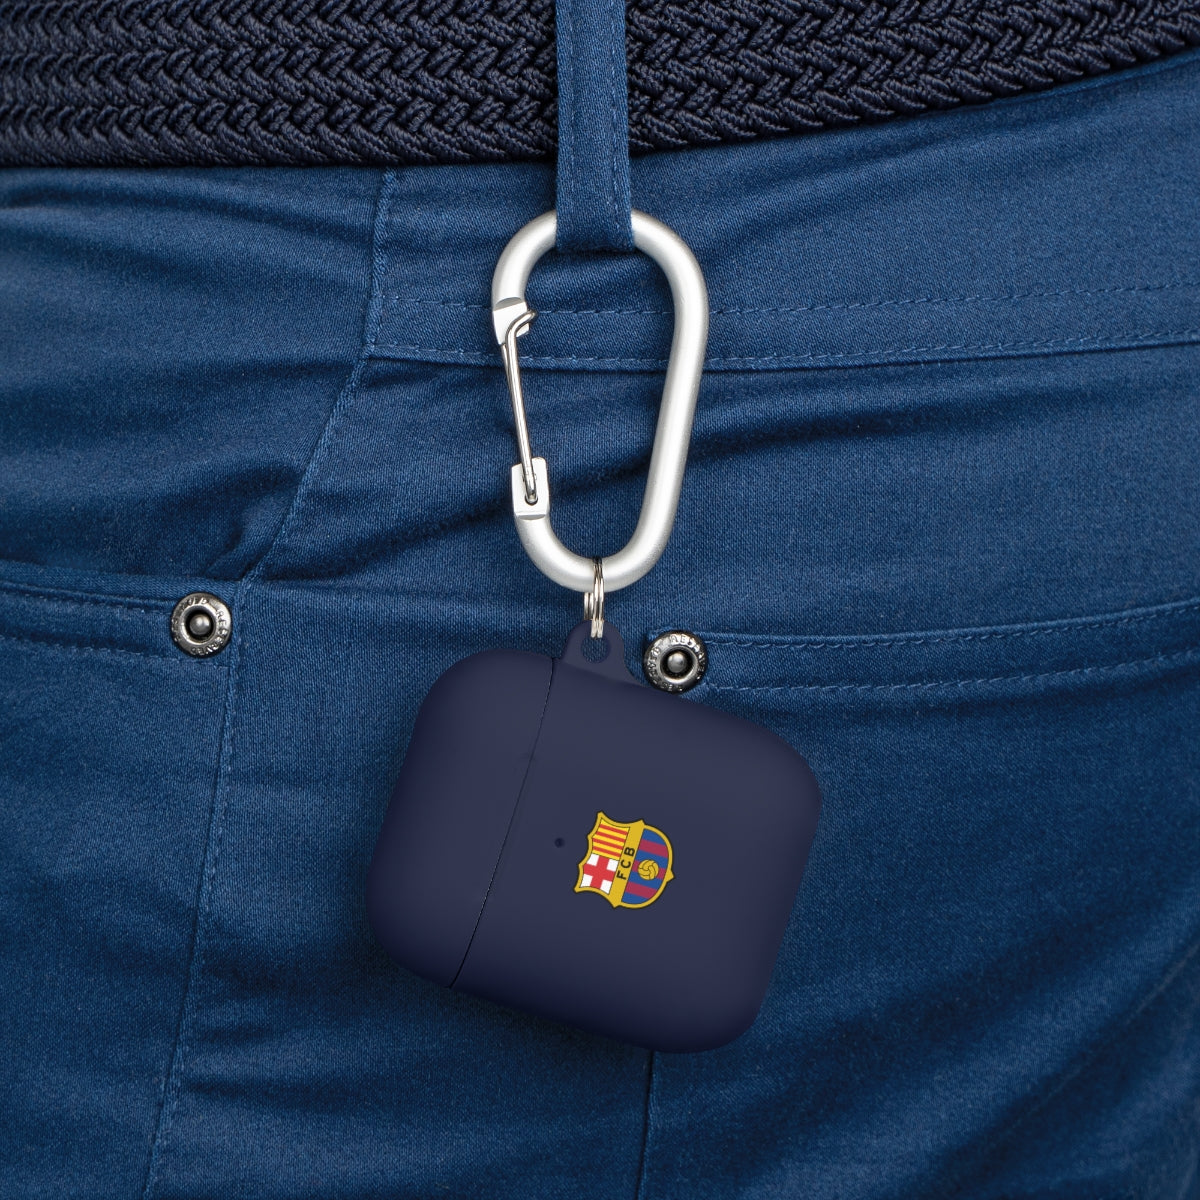 Barcelona AirPods and AirPods Pro Case Cover